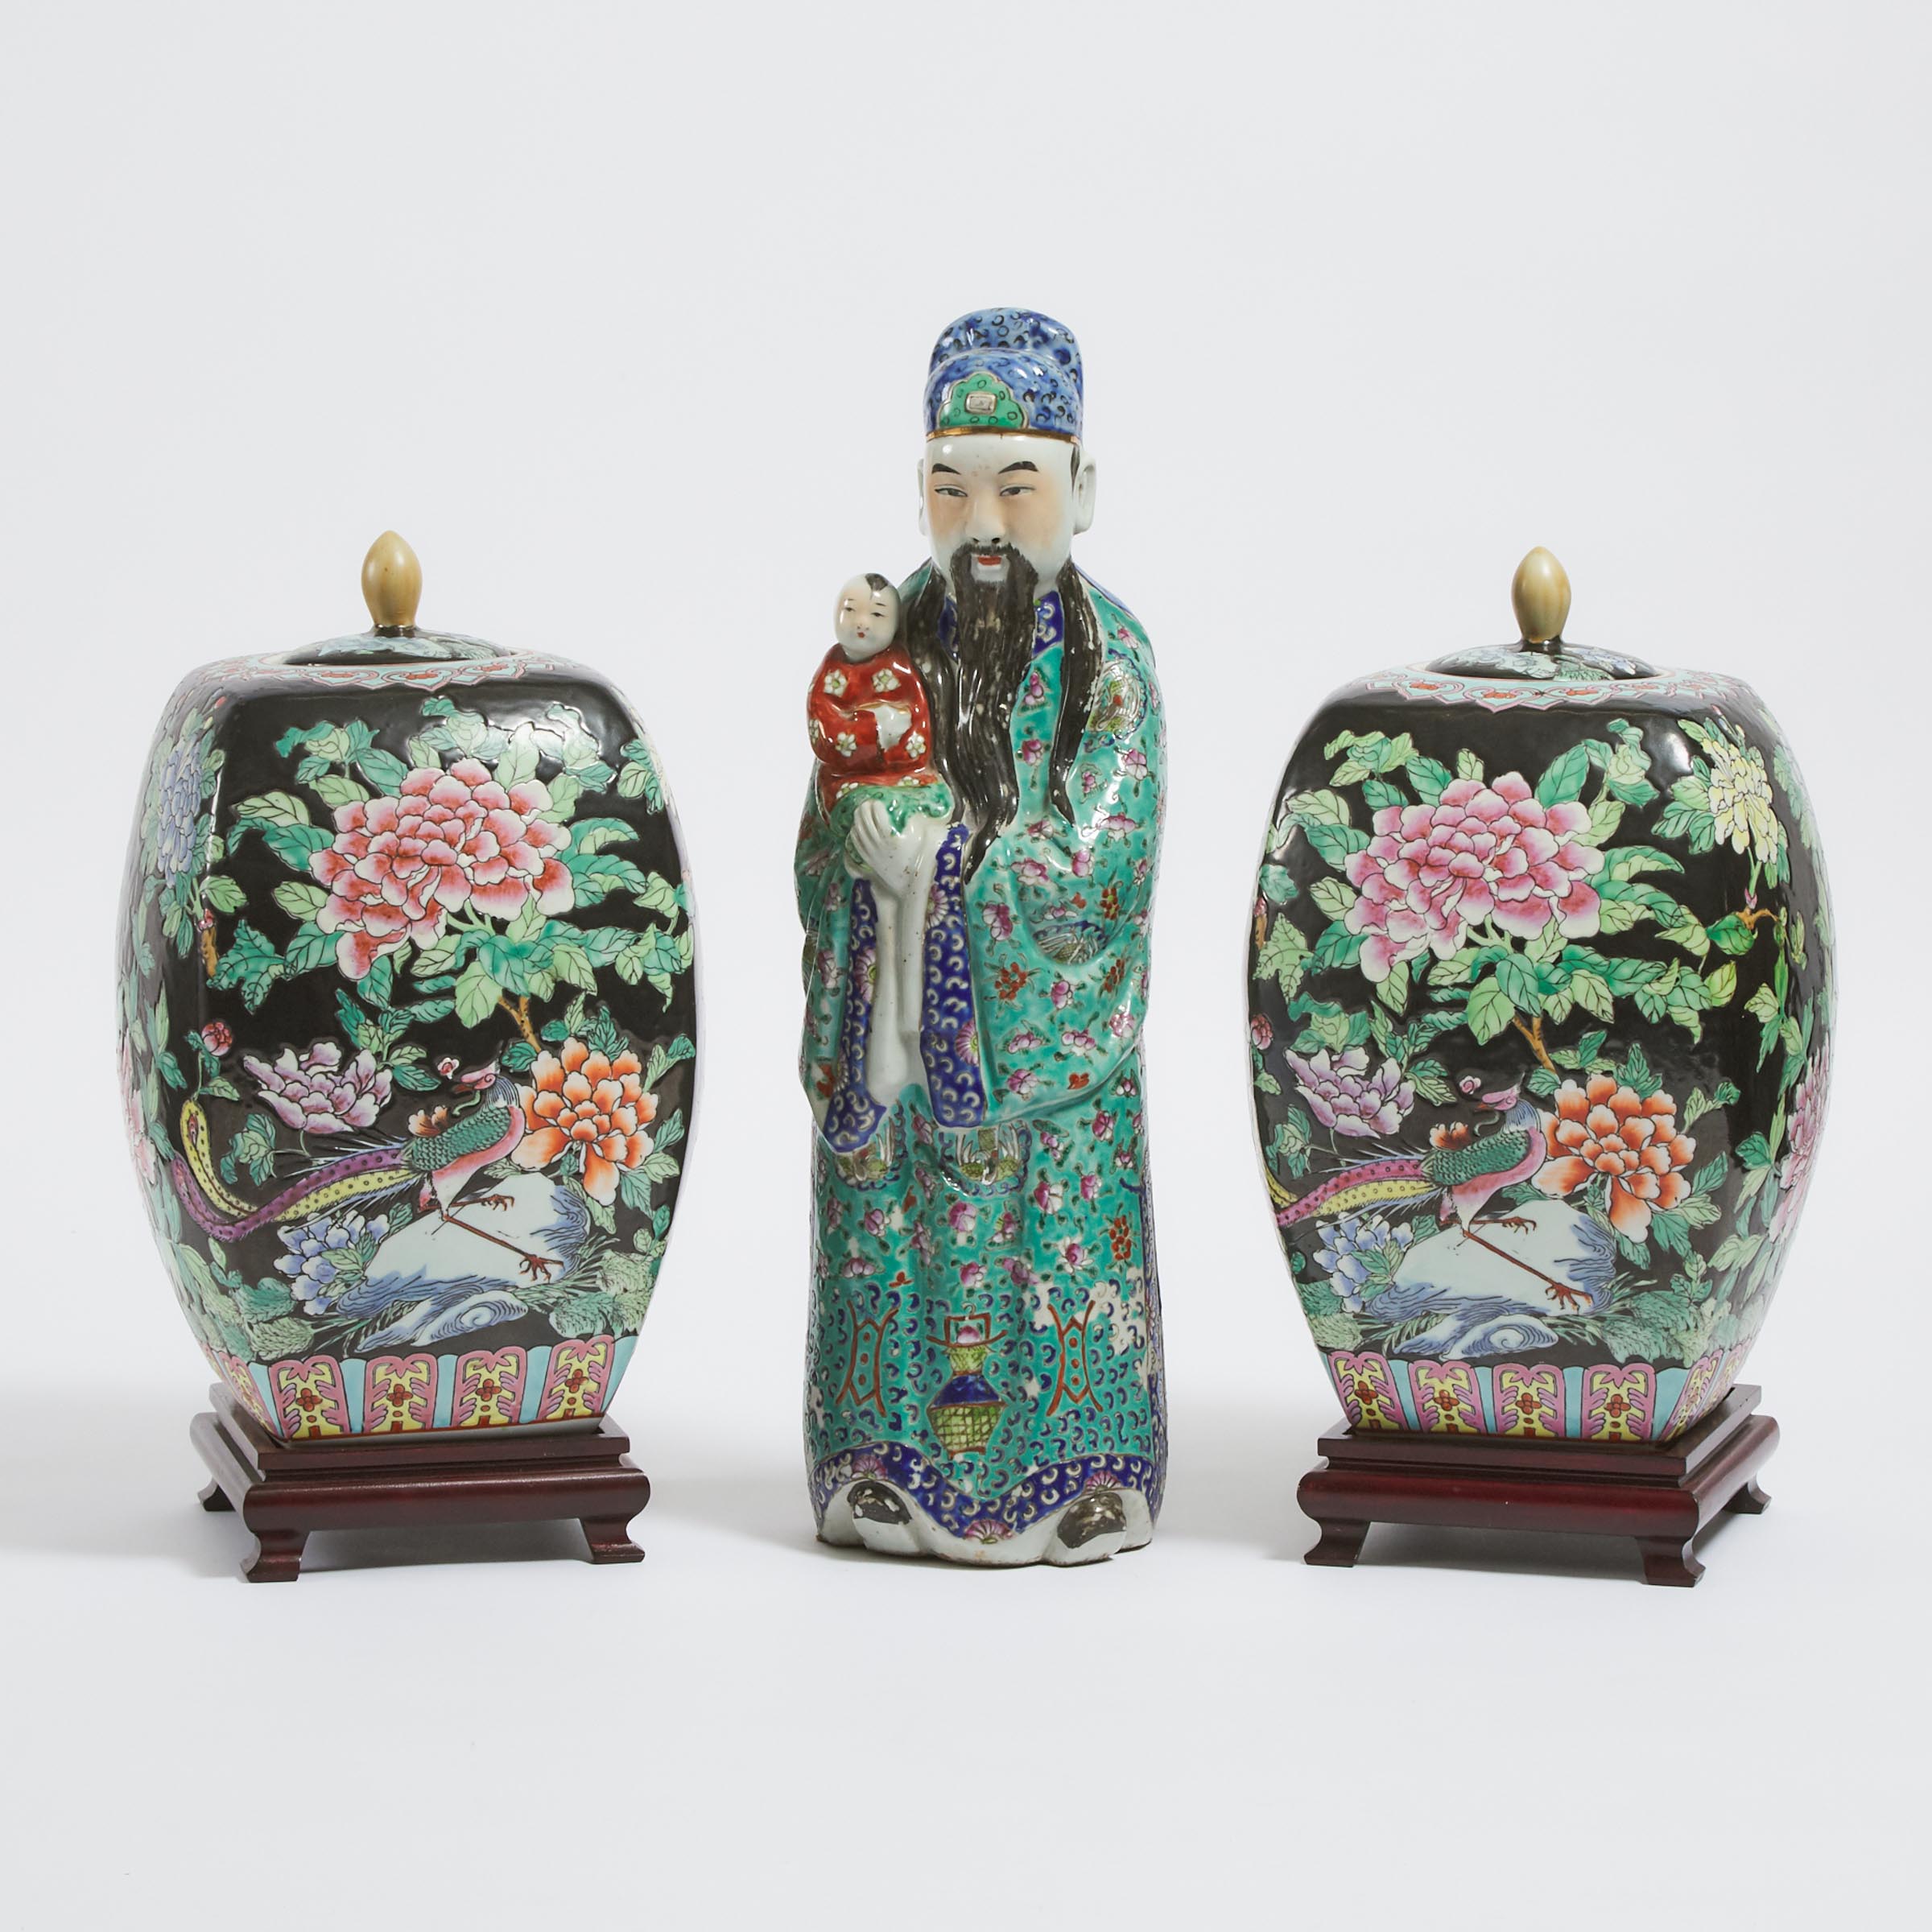 A Famille Rose Figure of Fu Xing, 19th Century, Together With a Pair of Famille Noire Ginger Jars, 20th Century